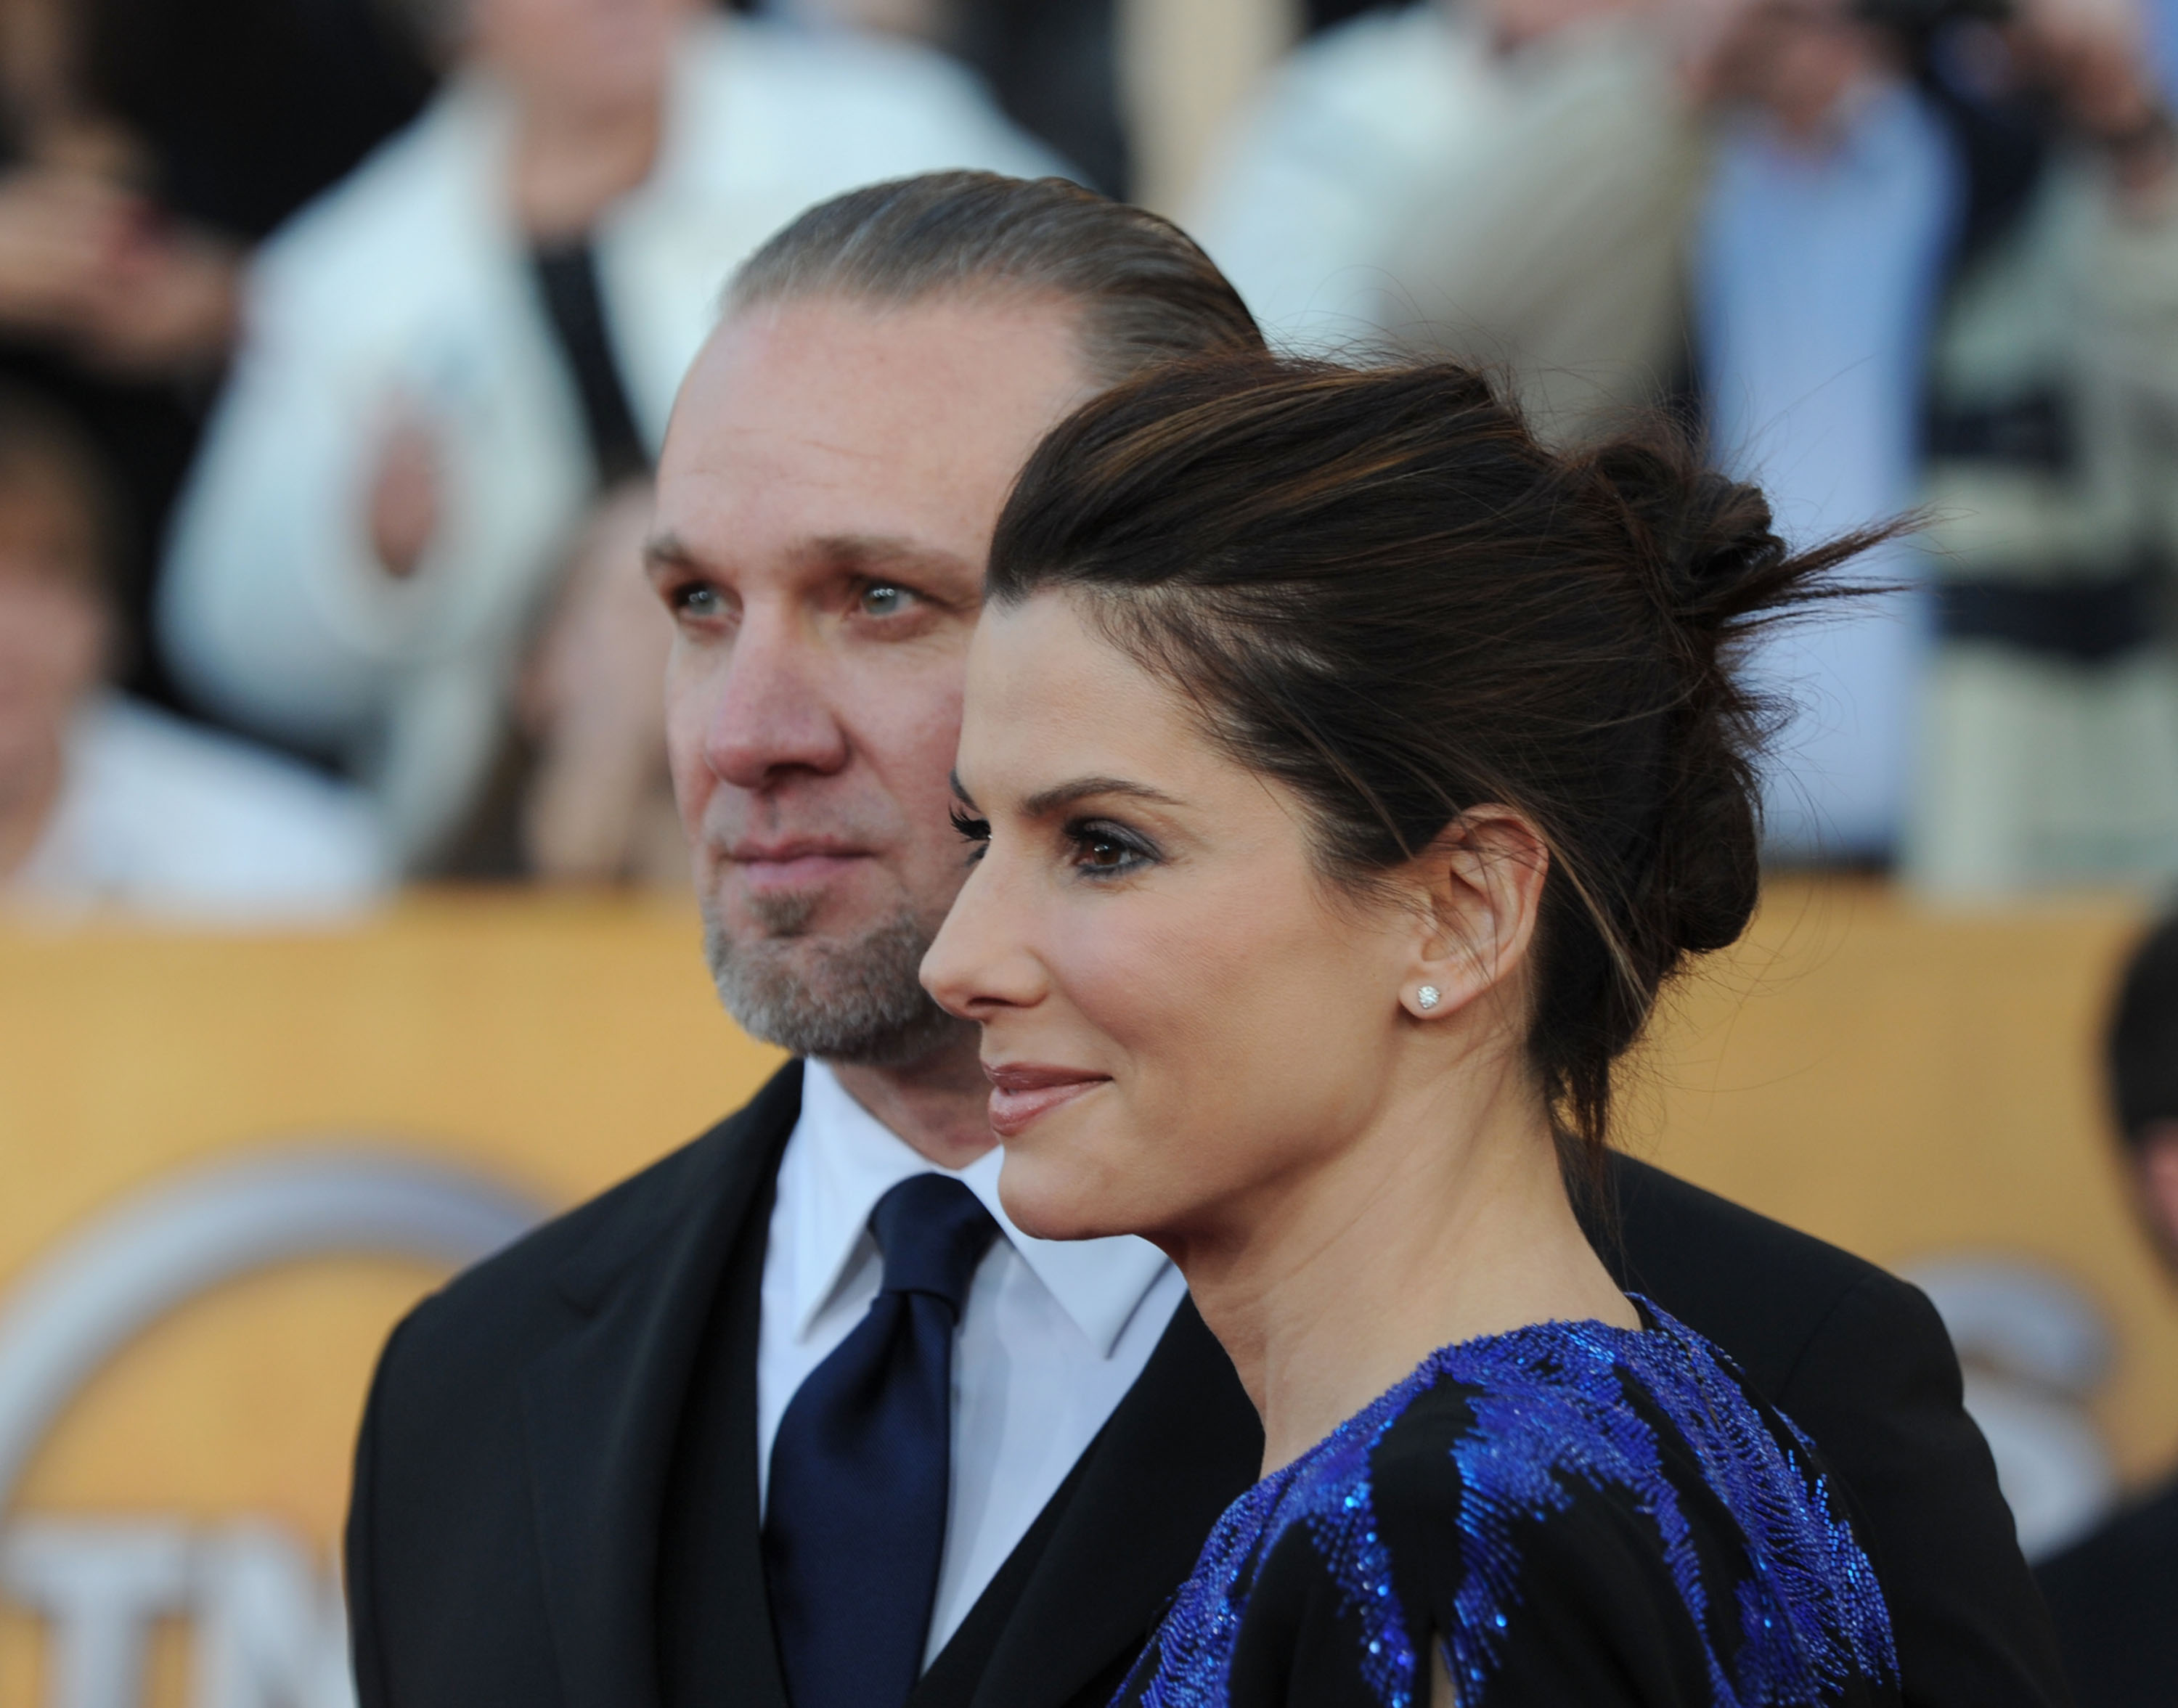 Sandra Bullock and Jesse James attend the 16th Annual Screen Actors Guild Awards on January 23, 2010 in Los Angeles, California | Source: Getty Images